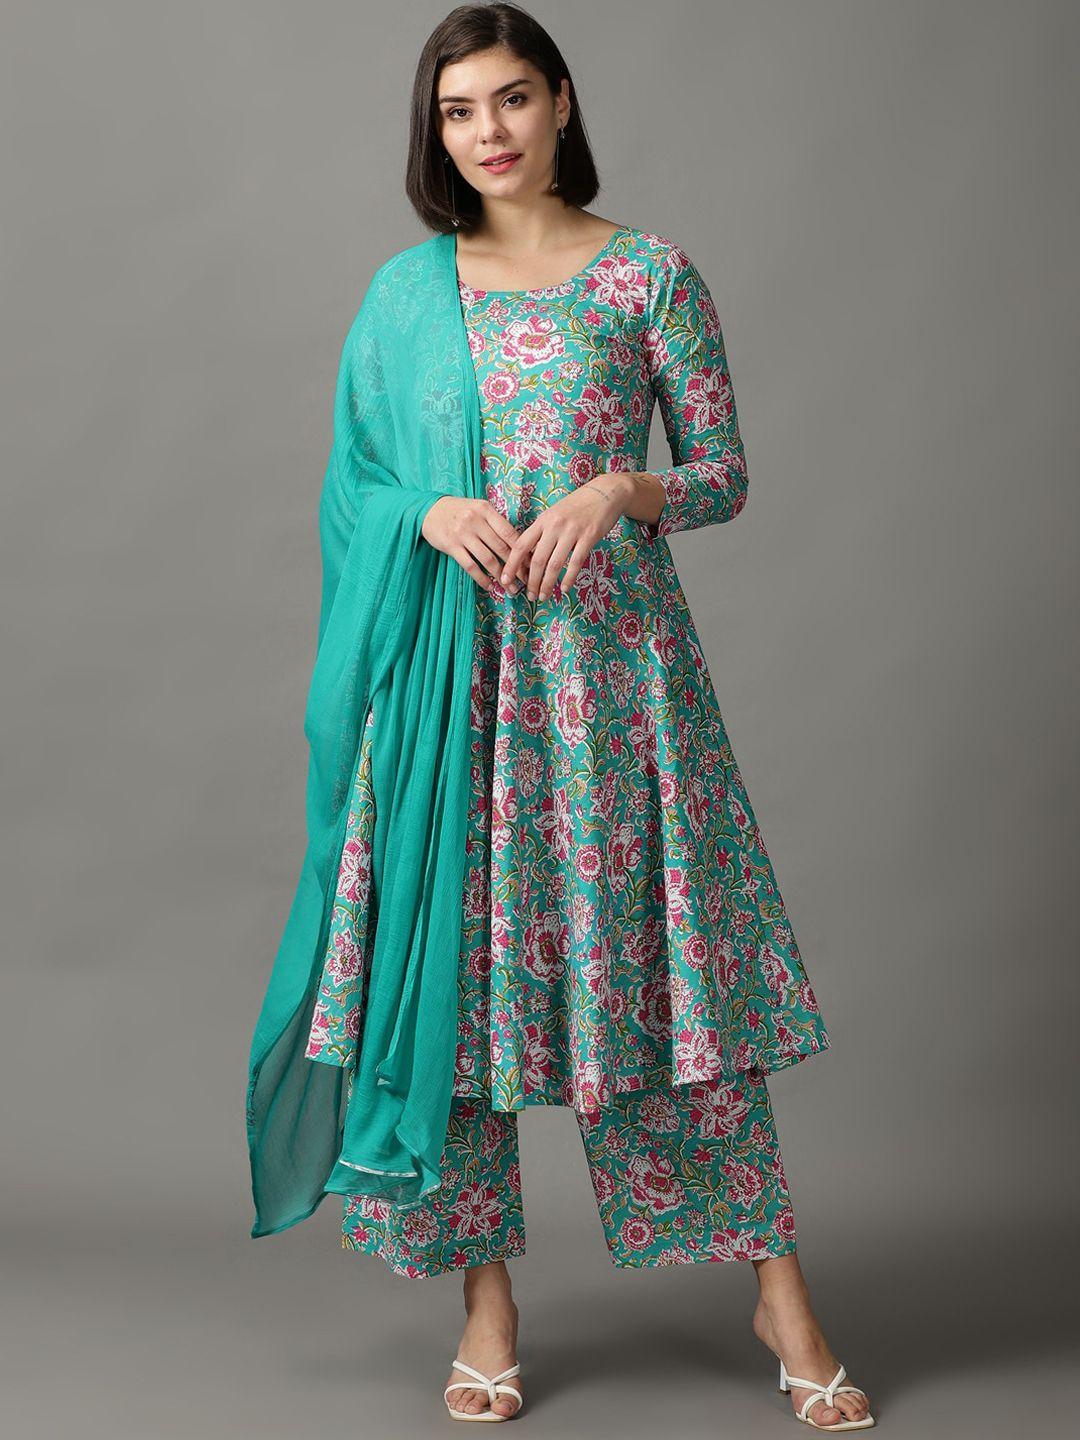 divination women turquoise blue floral printed panelled pure cotton kurta with palazzos & with dupatta